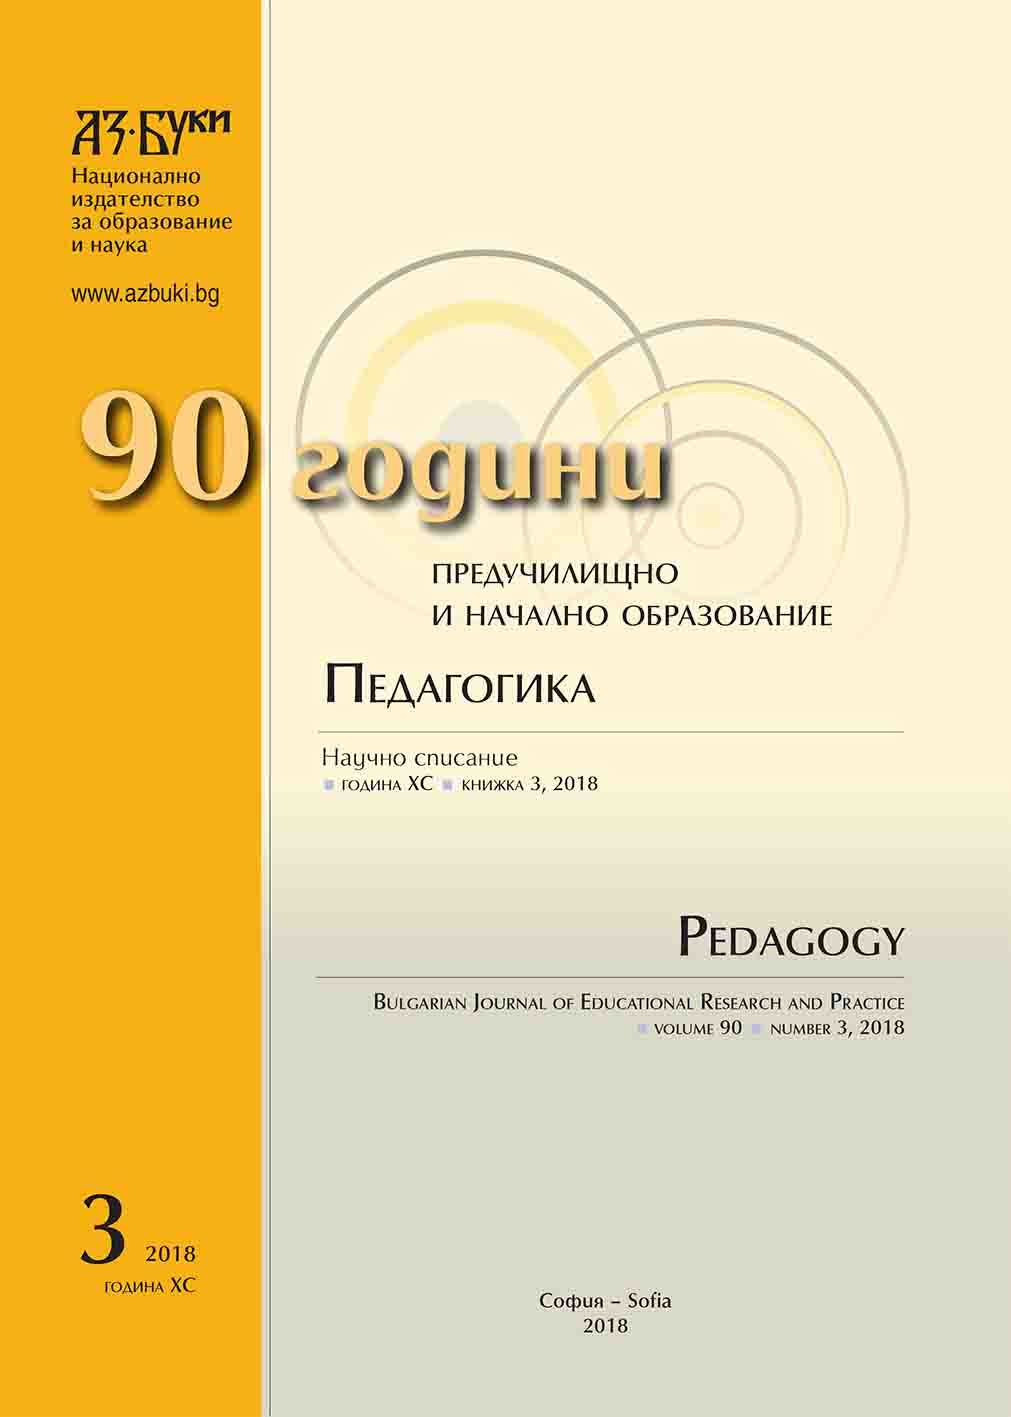 Prof. Dr. Marga Georgieva – a Clear Manifestation of Synergy in Science, Profession, Life Cover Image